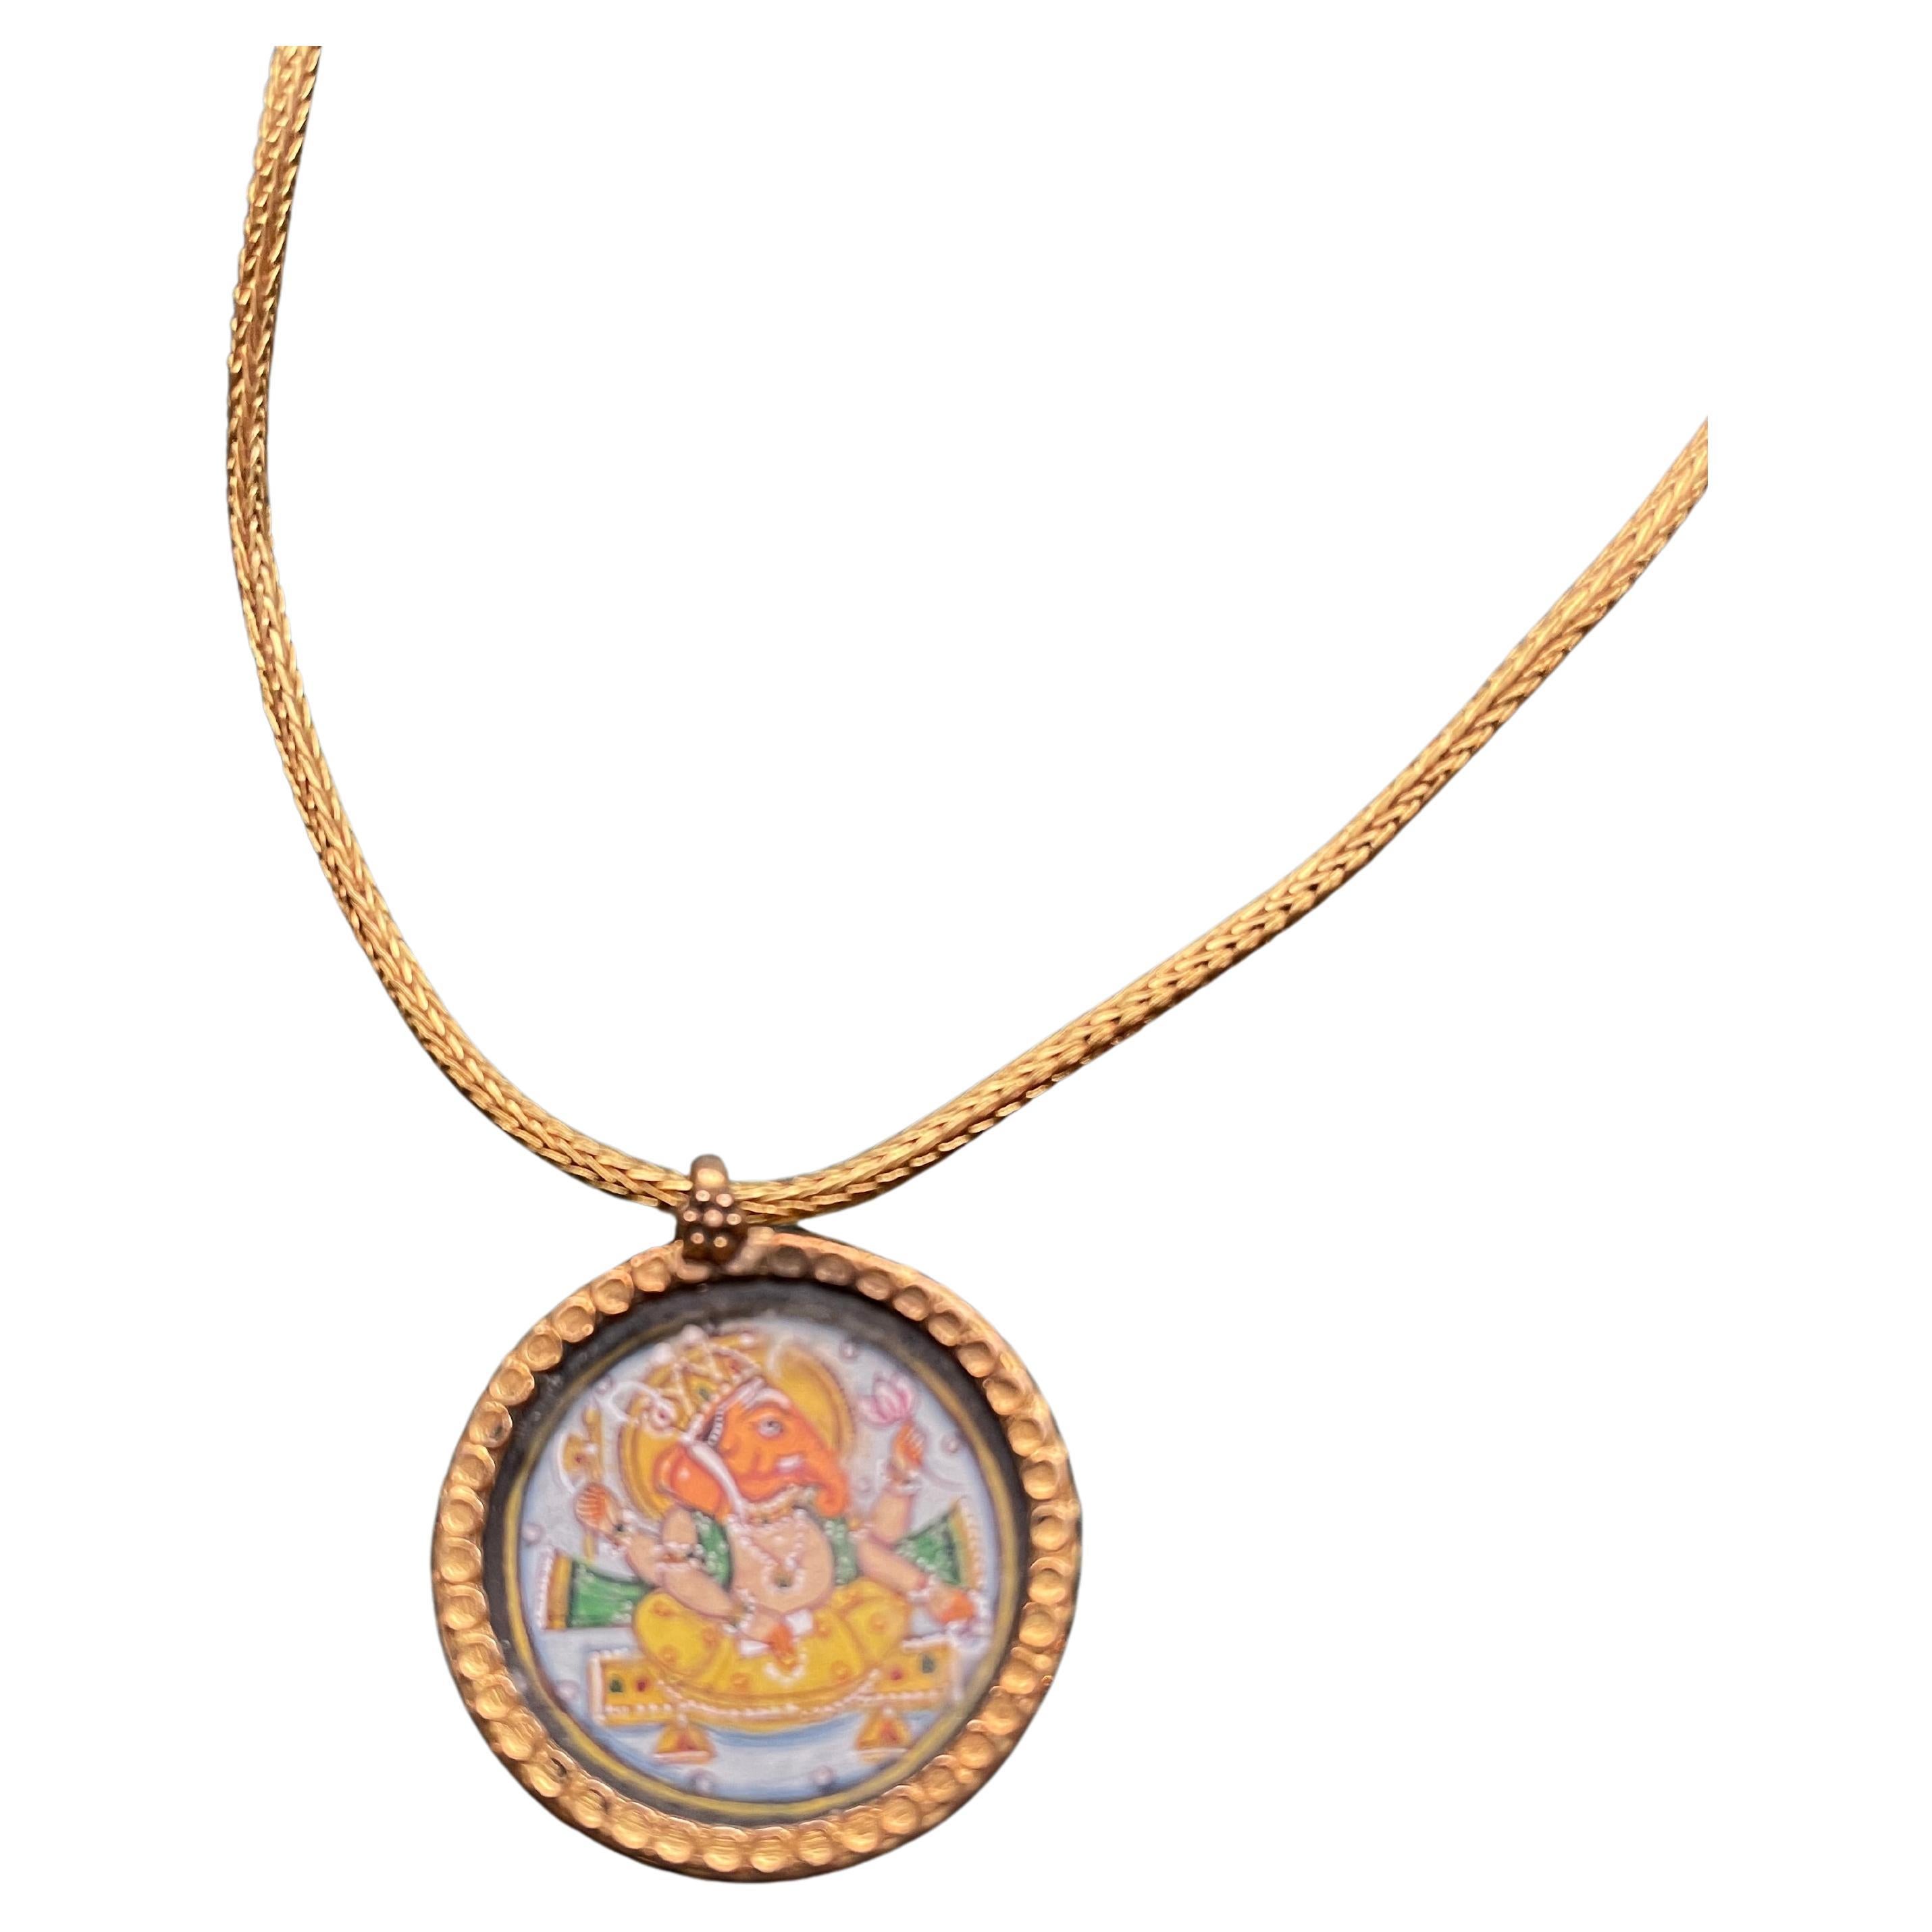 22K Gold, Hand-Painted Ganesh Pendant Necklace, India